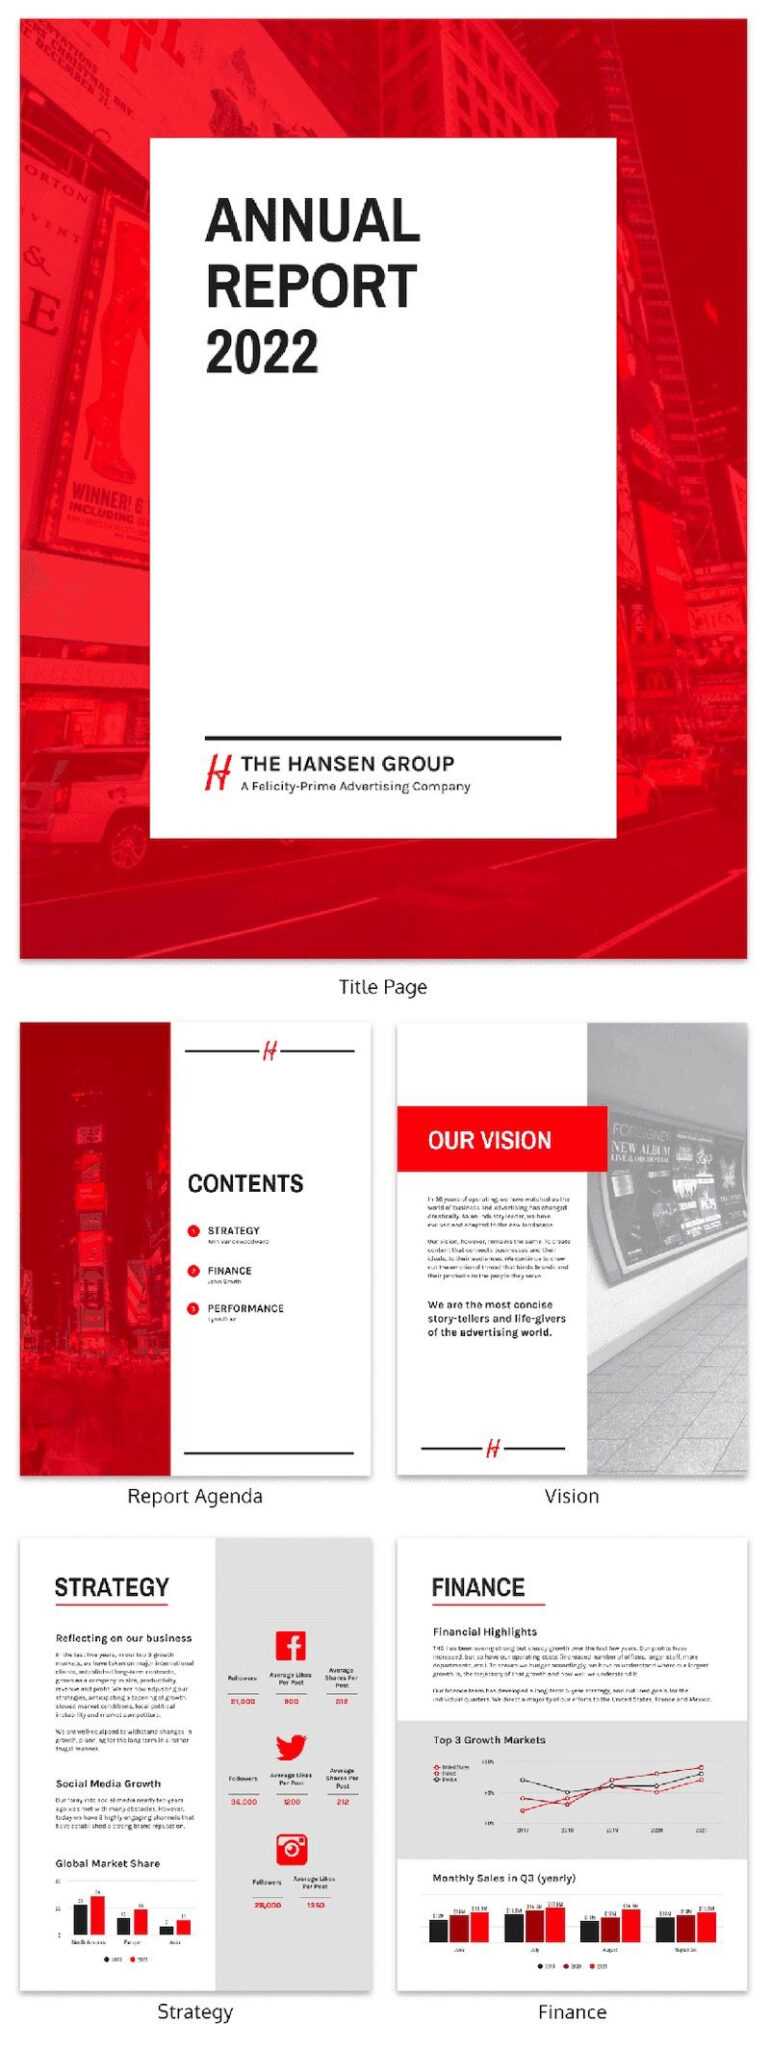 55-customizable-annual-report-design-templates-examples-tips-in-hr-annual-report-template